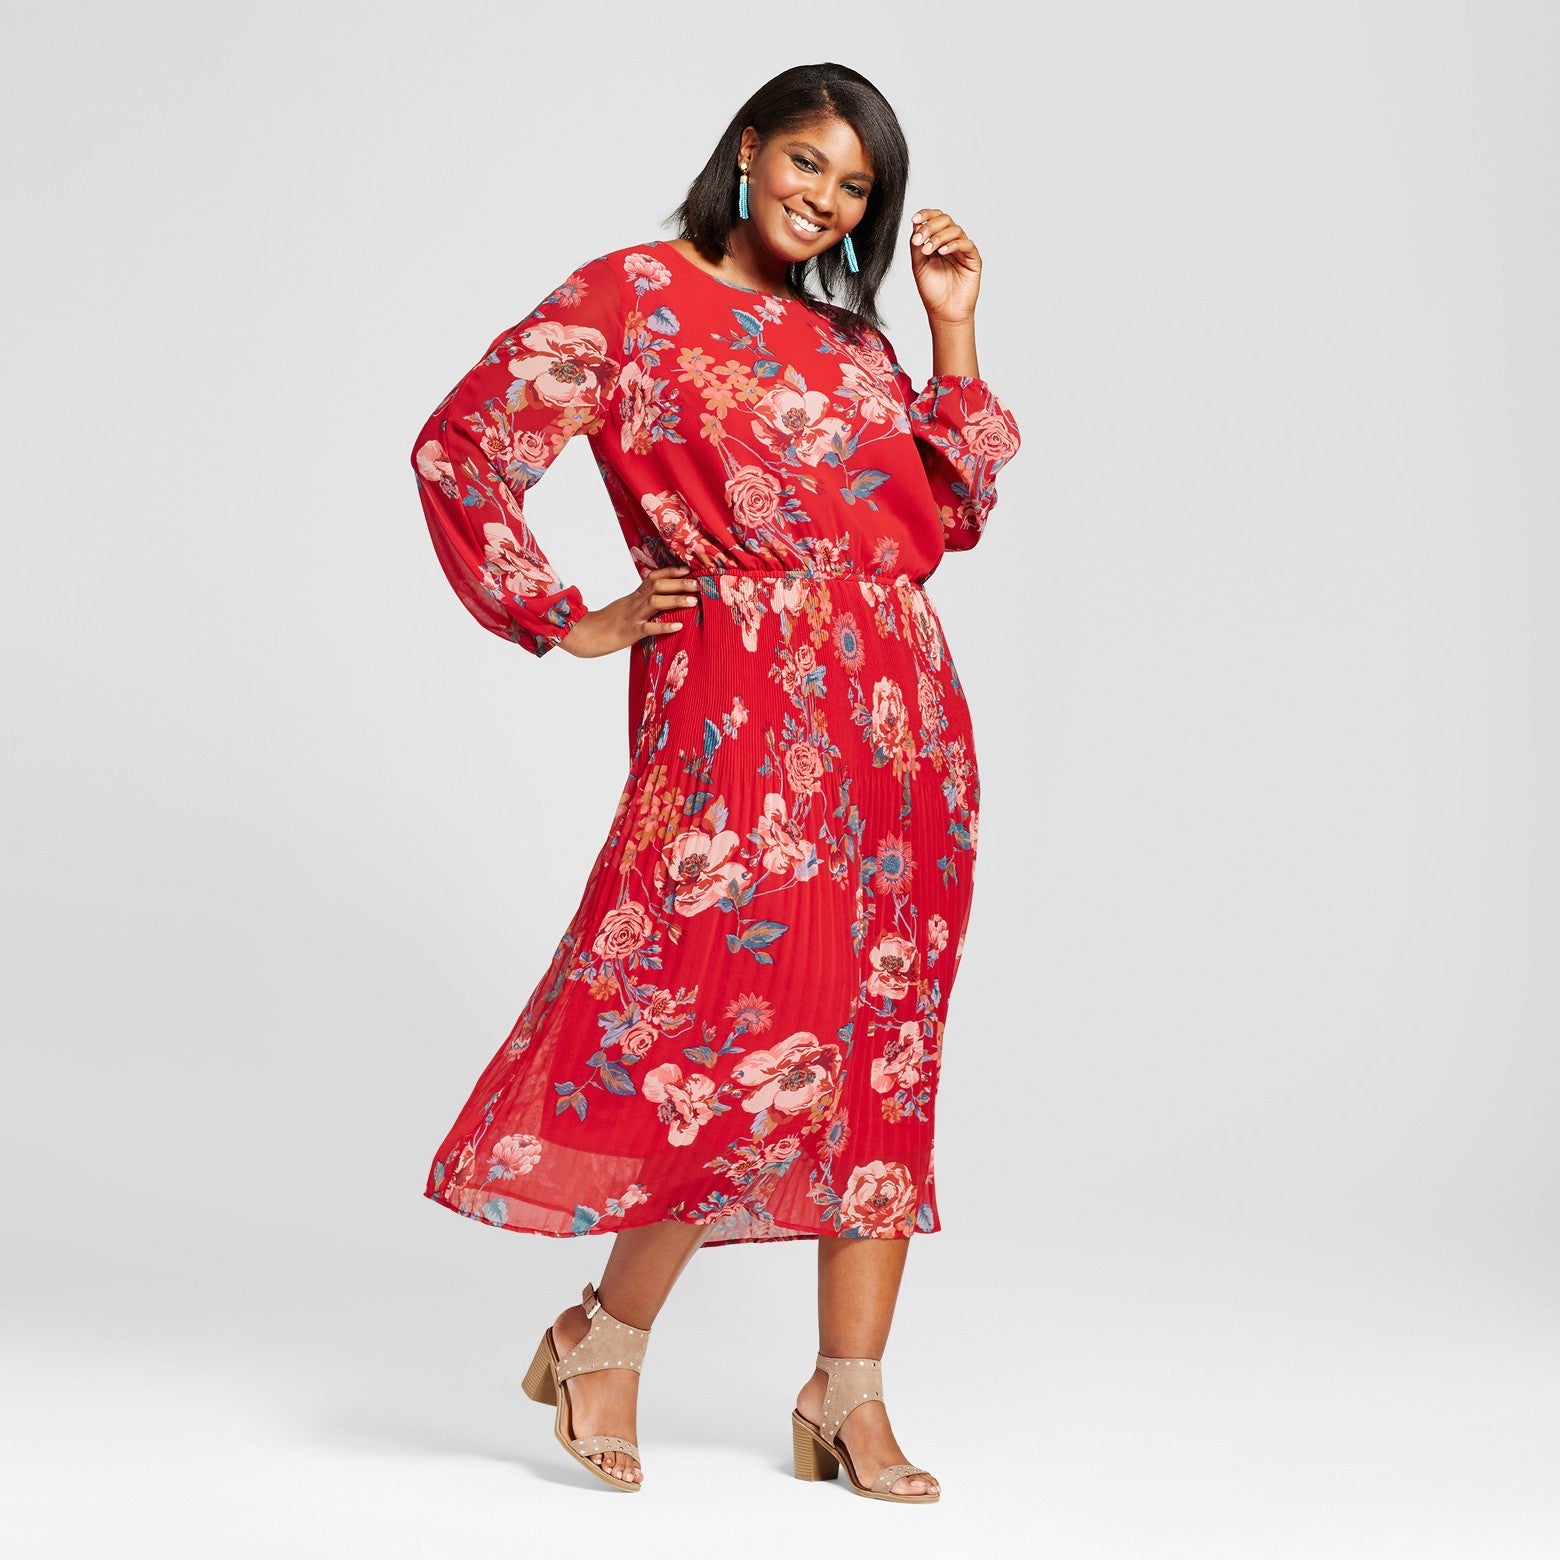 11 Curve-Friendly Holiday Dresses From Target
